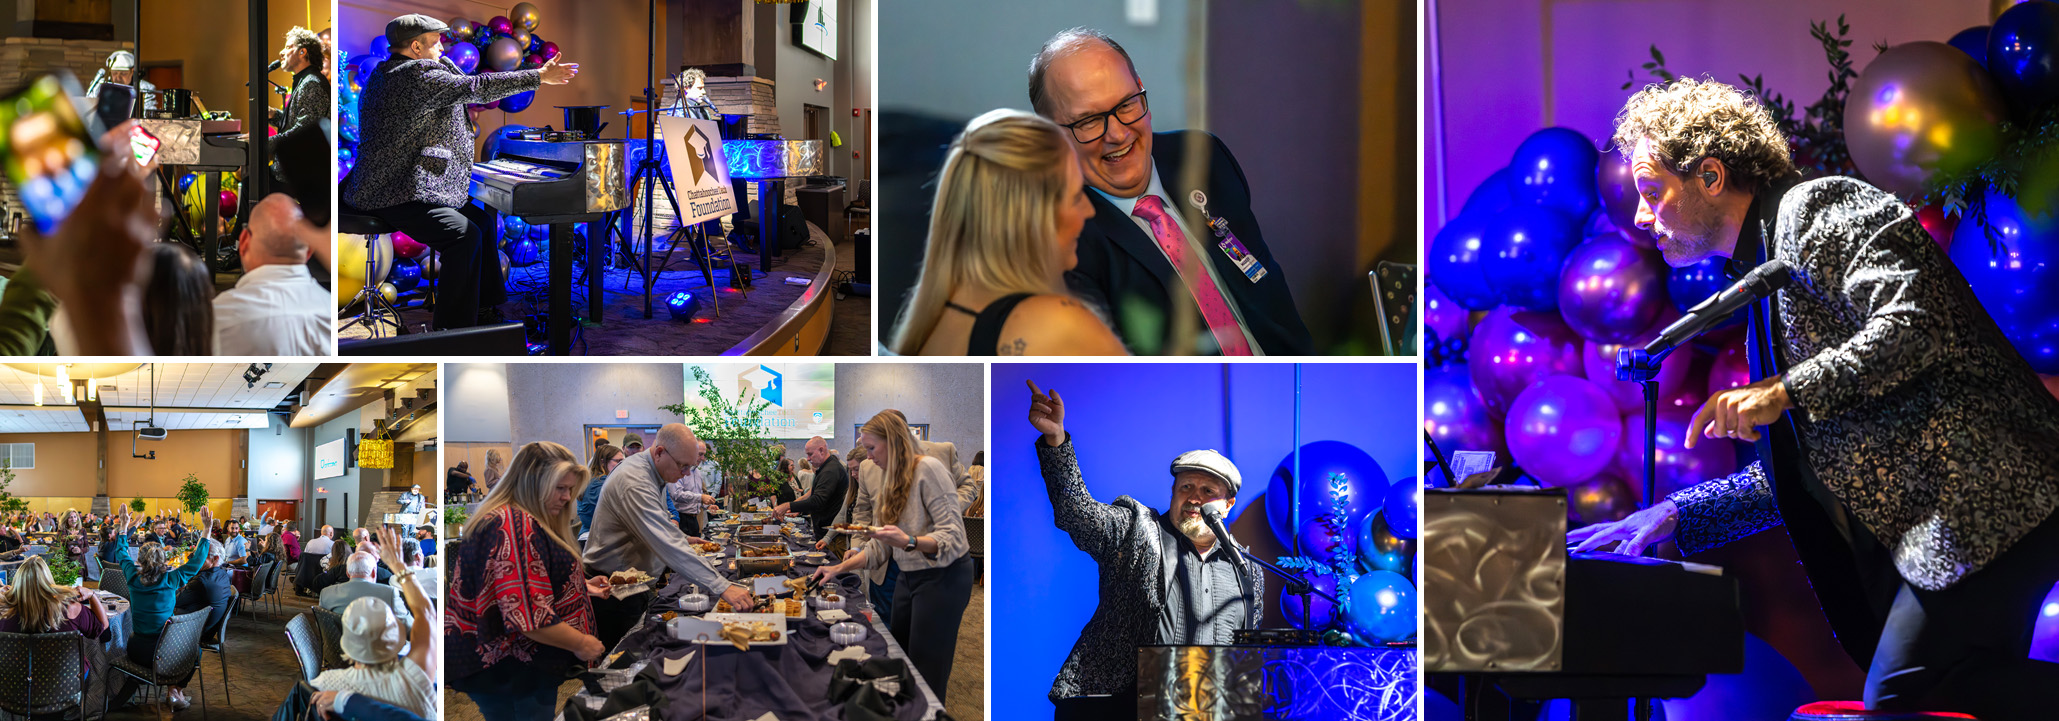 A photo collage of guests smiling and enjoying food while listening to the Dueling Pianos show